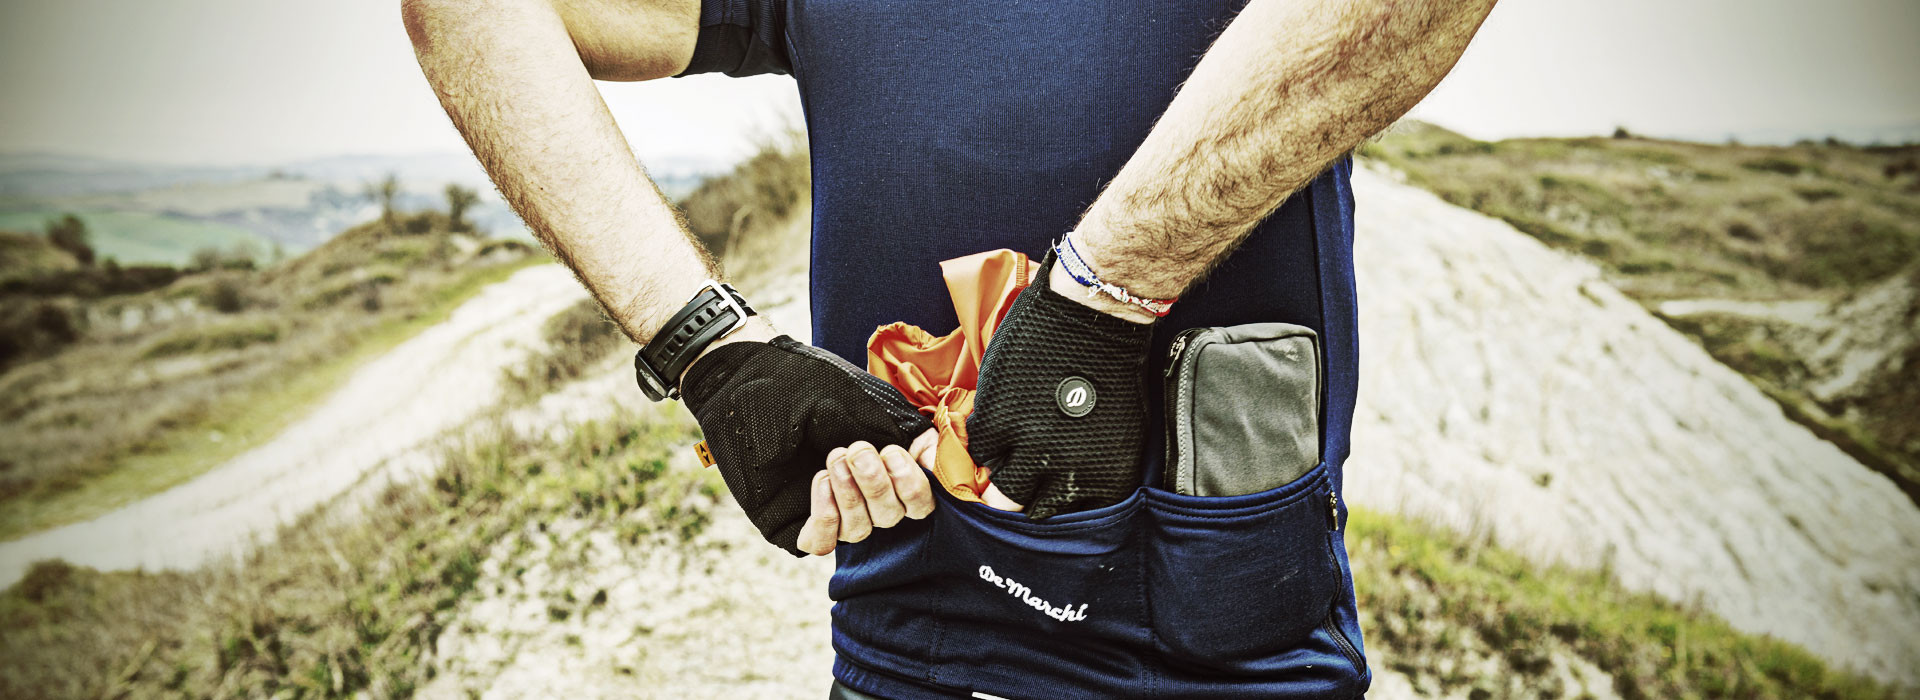 Demarchi - Short cycling gloves